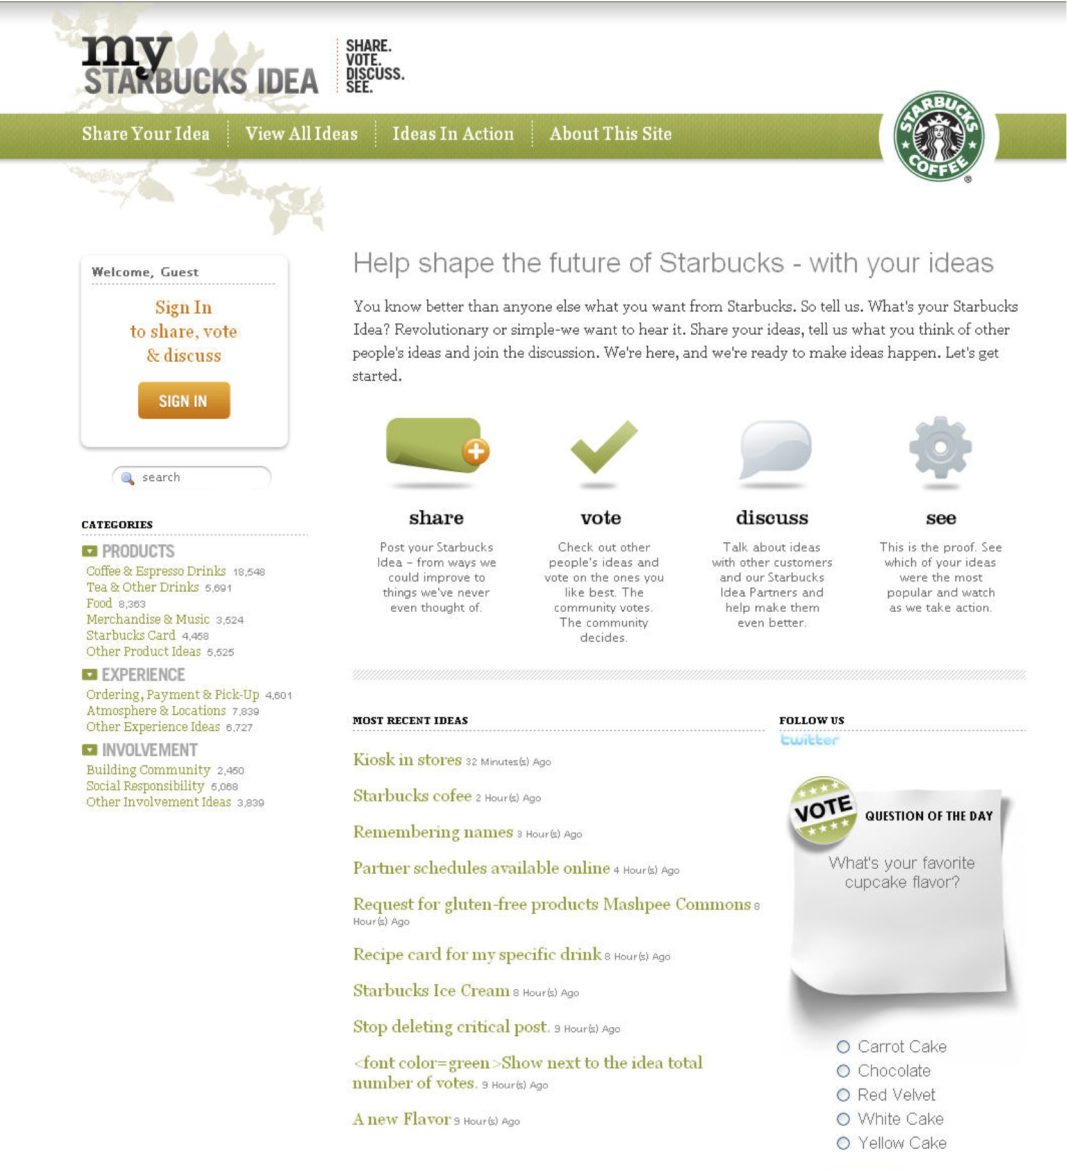 mystarbucksidea: then and now - has anything changed